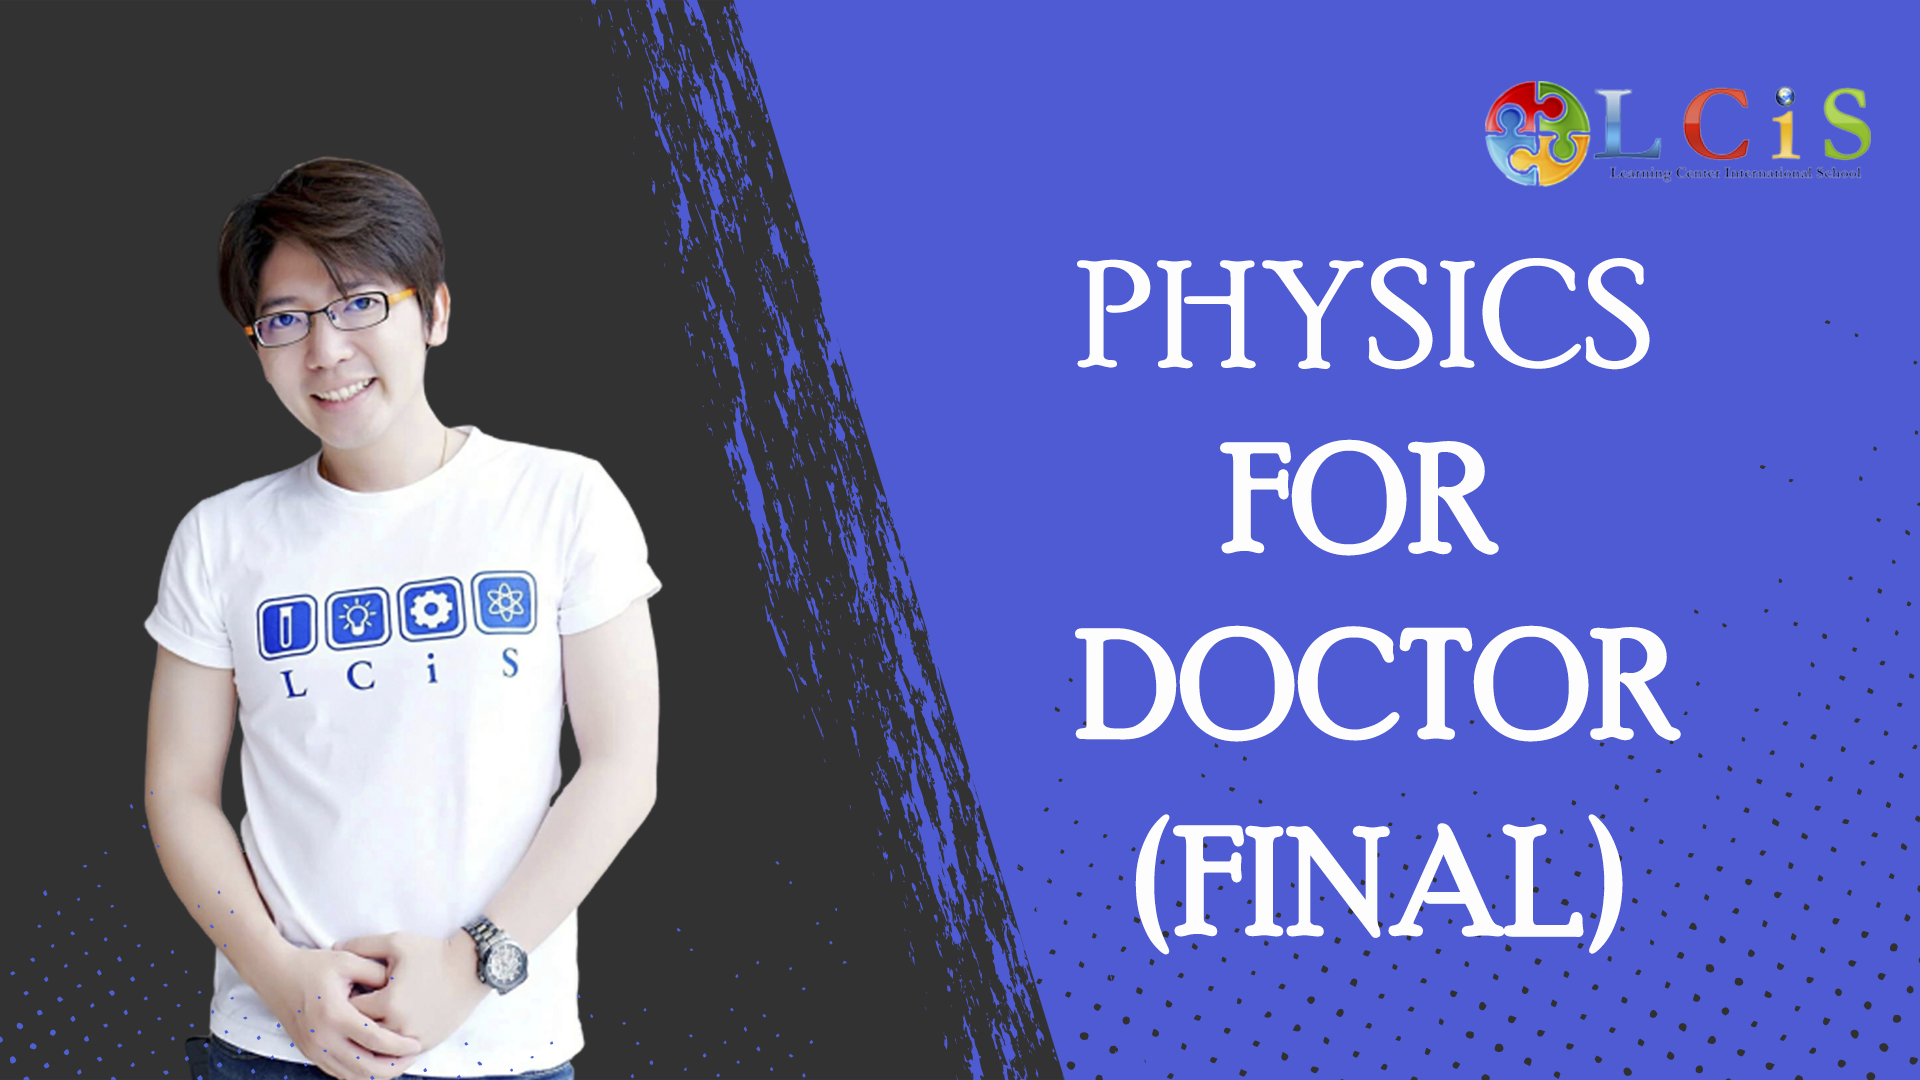 Physics for Doctor (final)